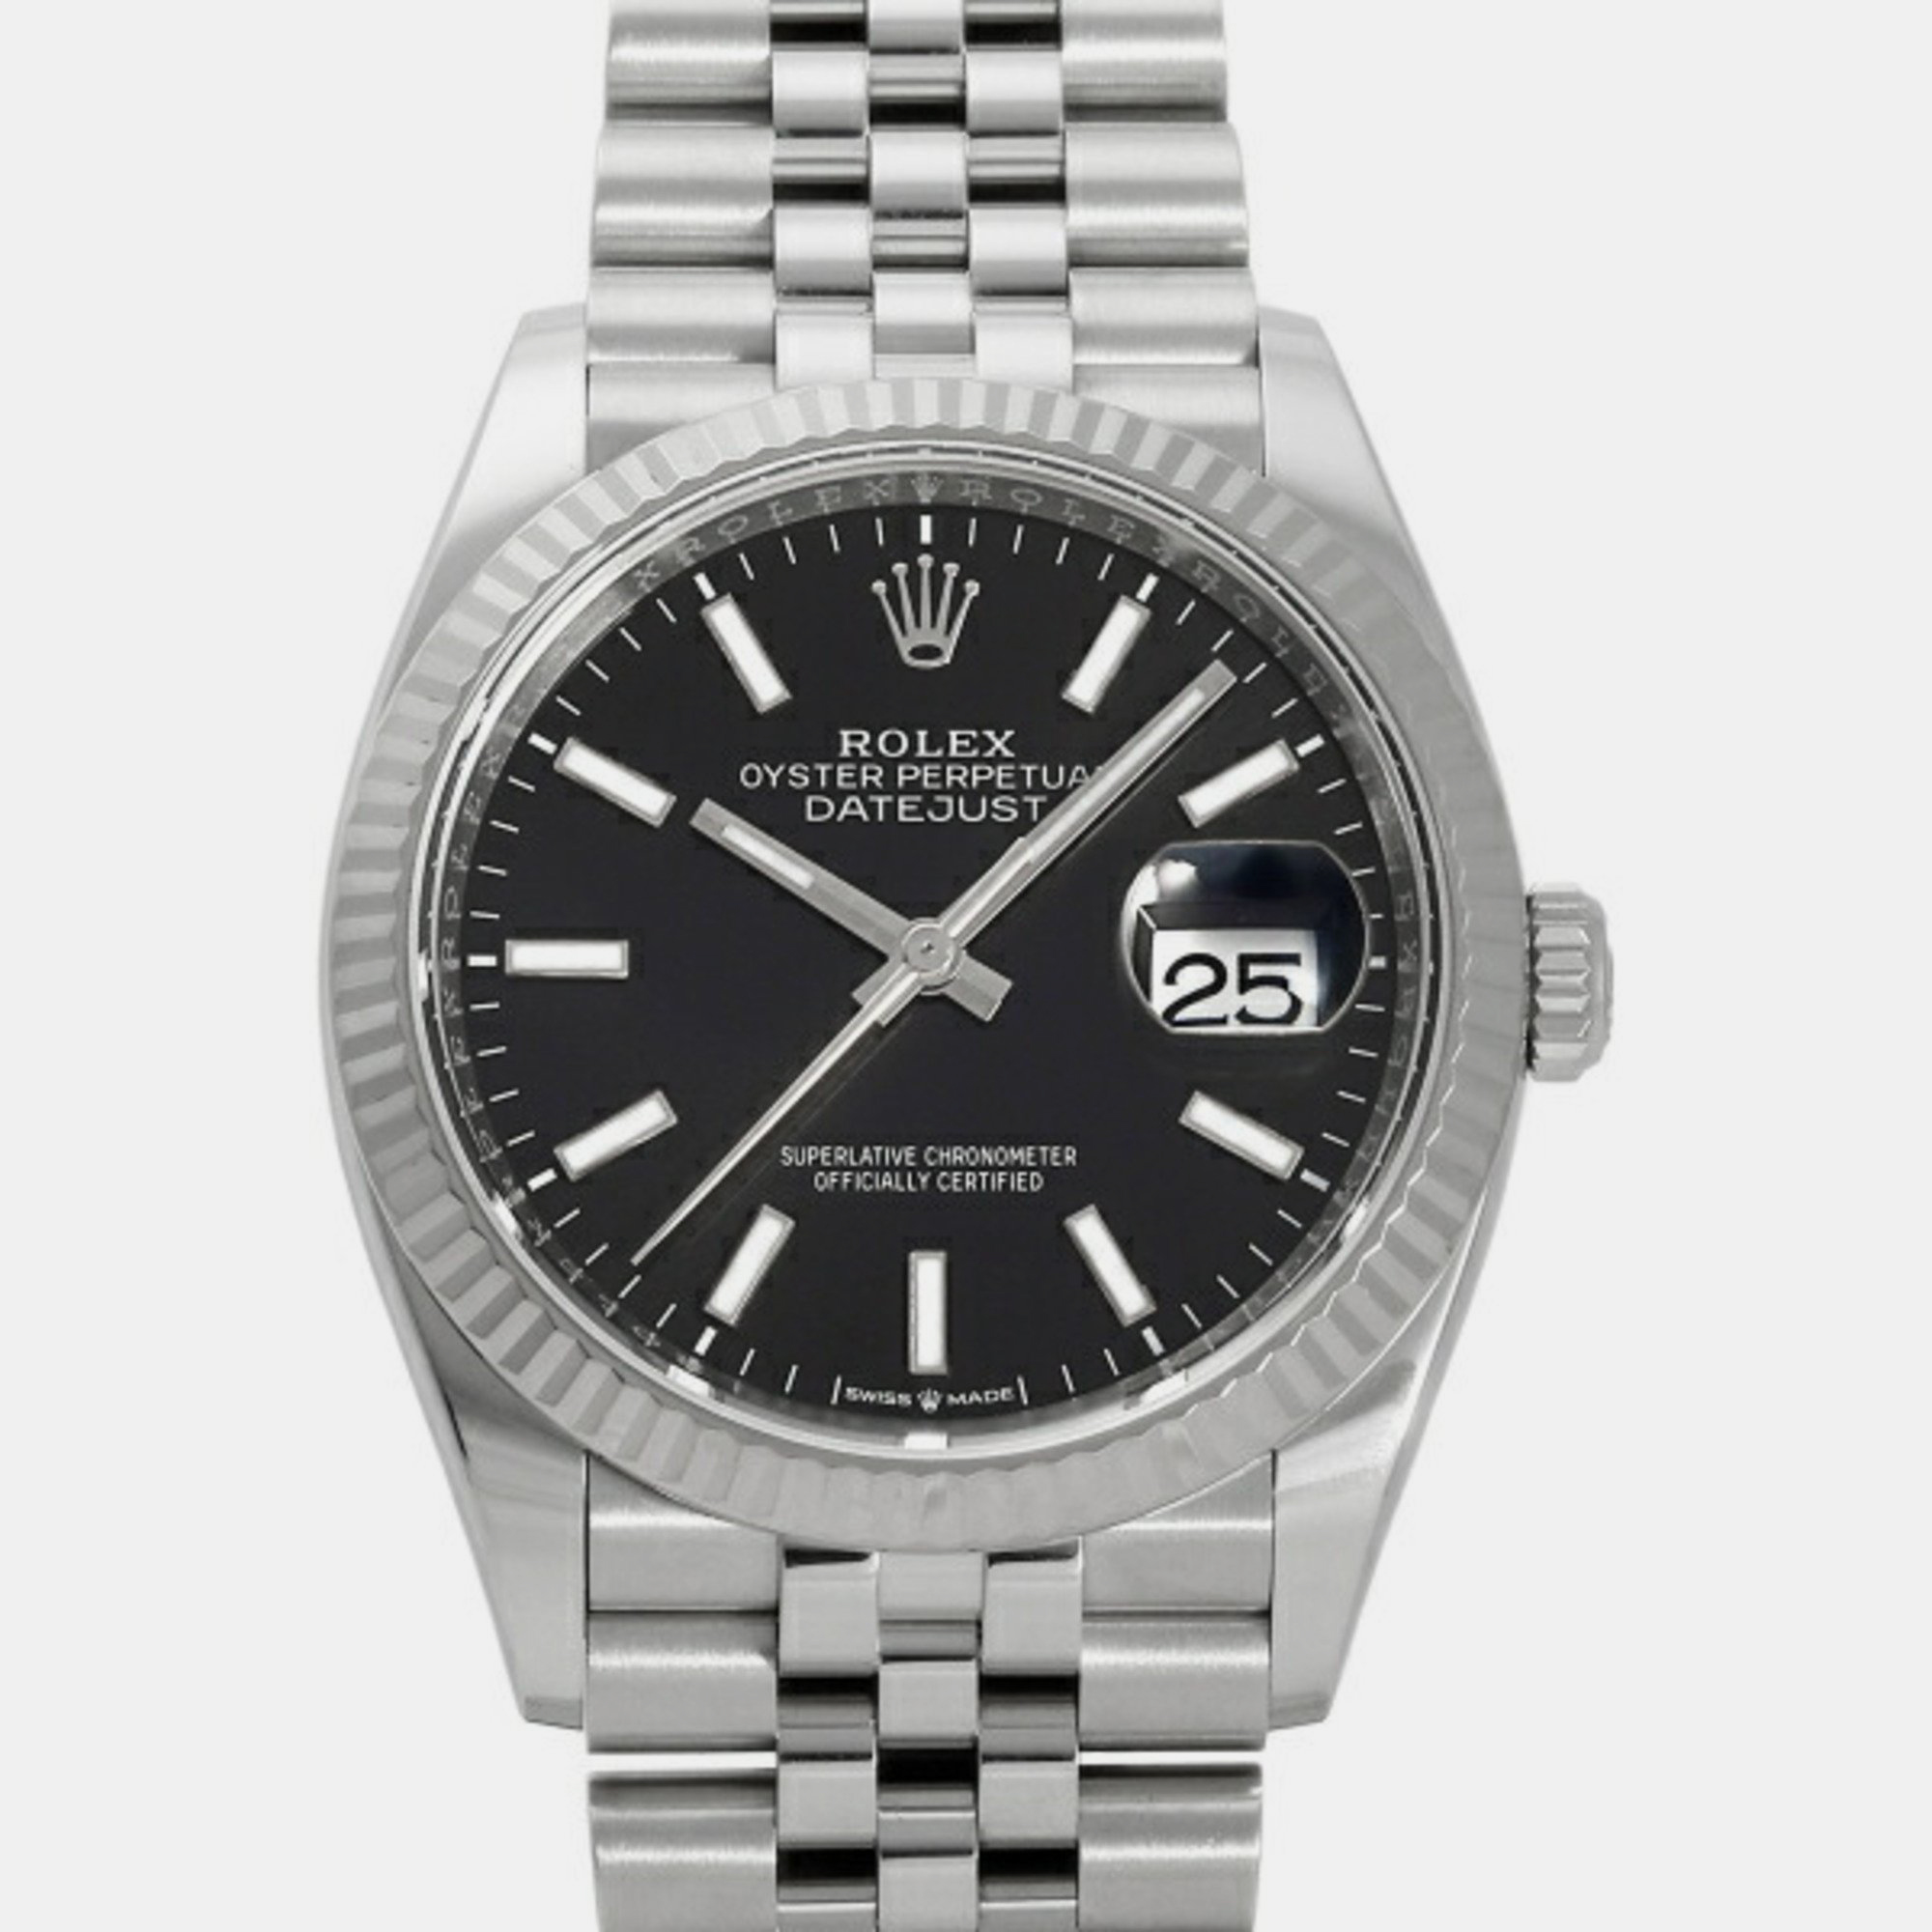 Rolex Black 18k White Gold And Stainless Steel Datejust 126234 Automatic Men's Wristwatch 36 Mm